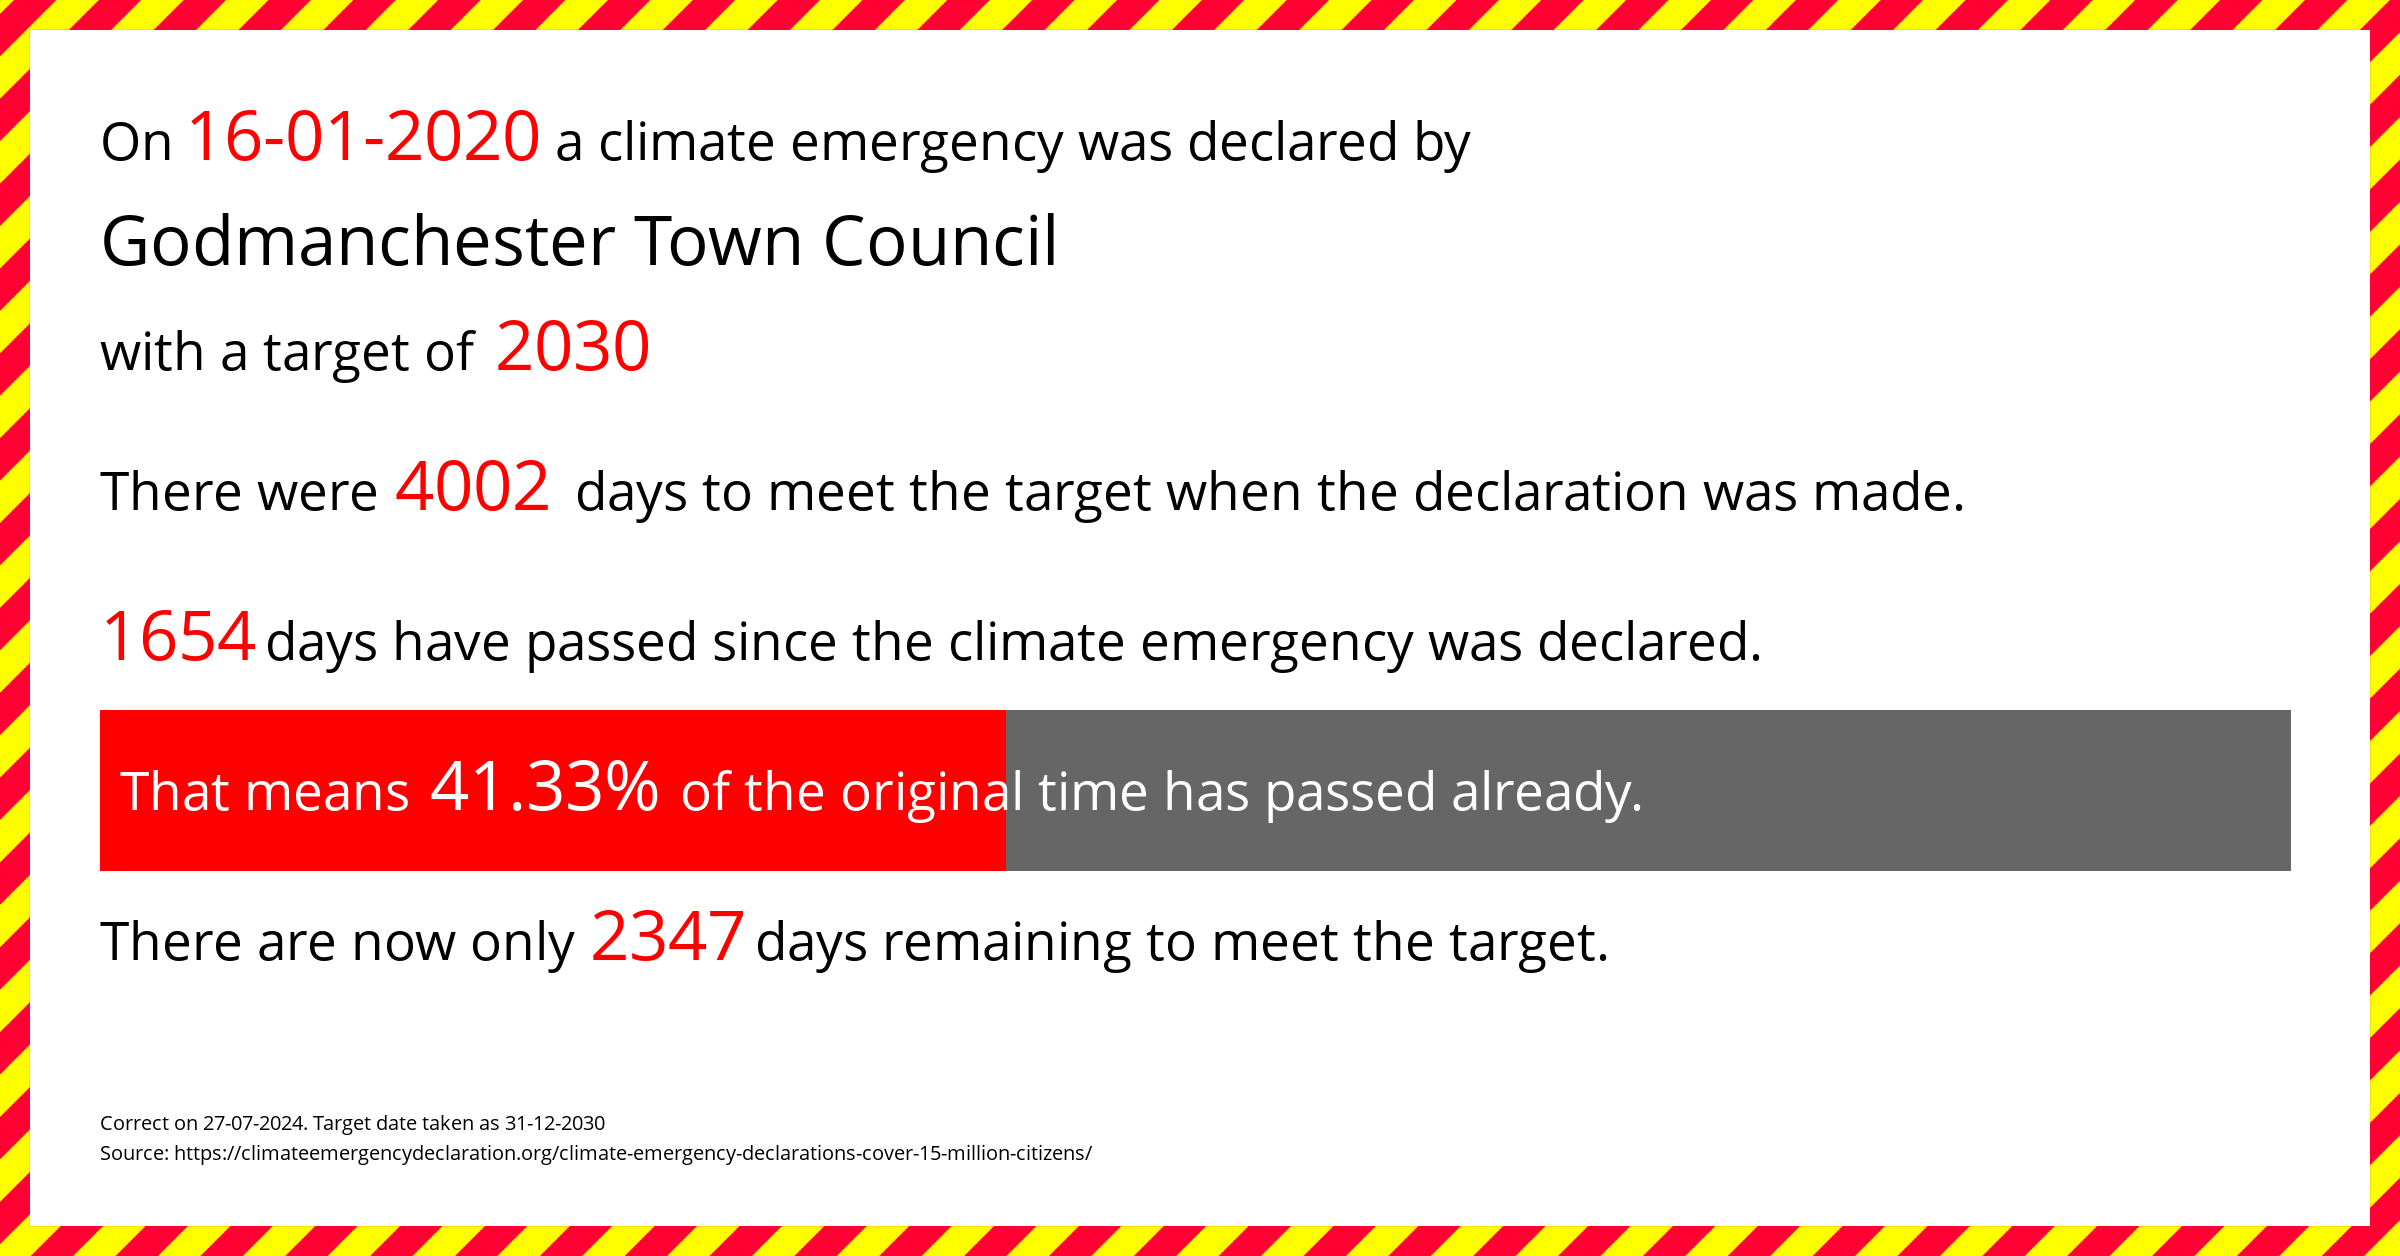 Godmanchester Town Council declared a Climate emergency on Thursday 16th January 2020, with a target of 2030.